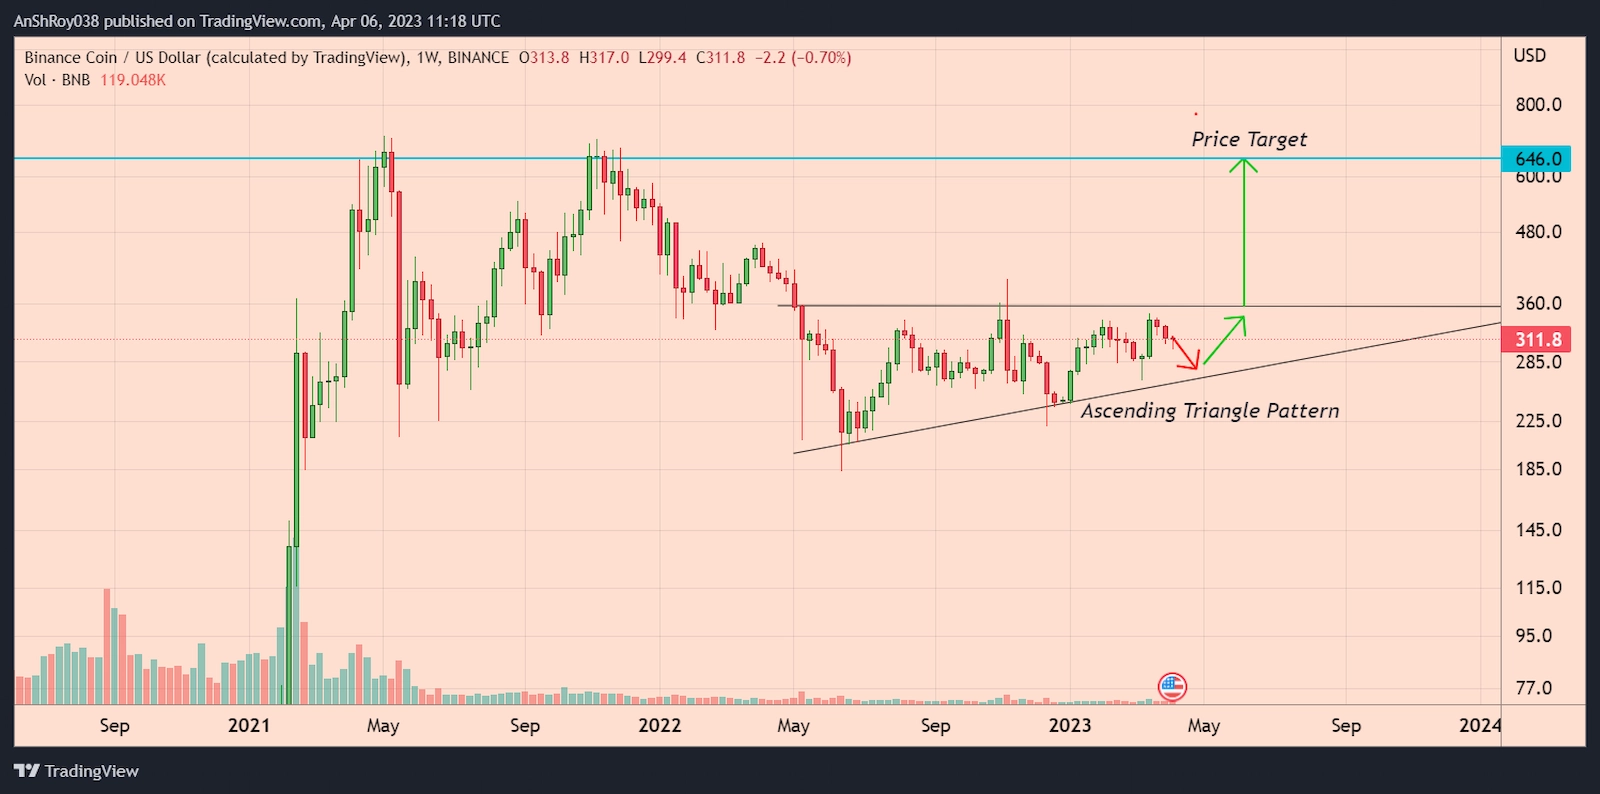 BNB price formed a bullish technical pattern with a 107% price target